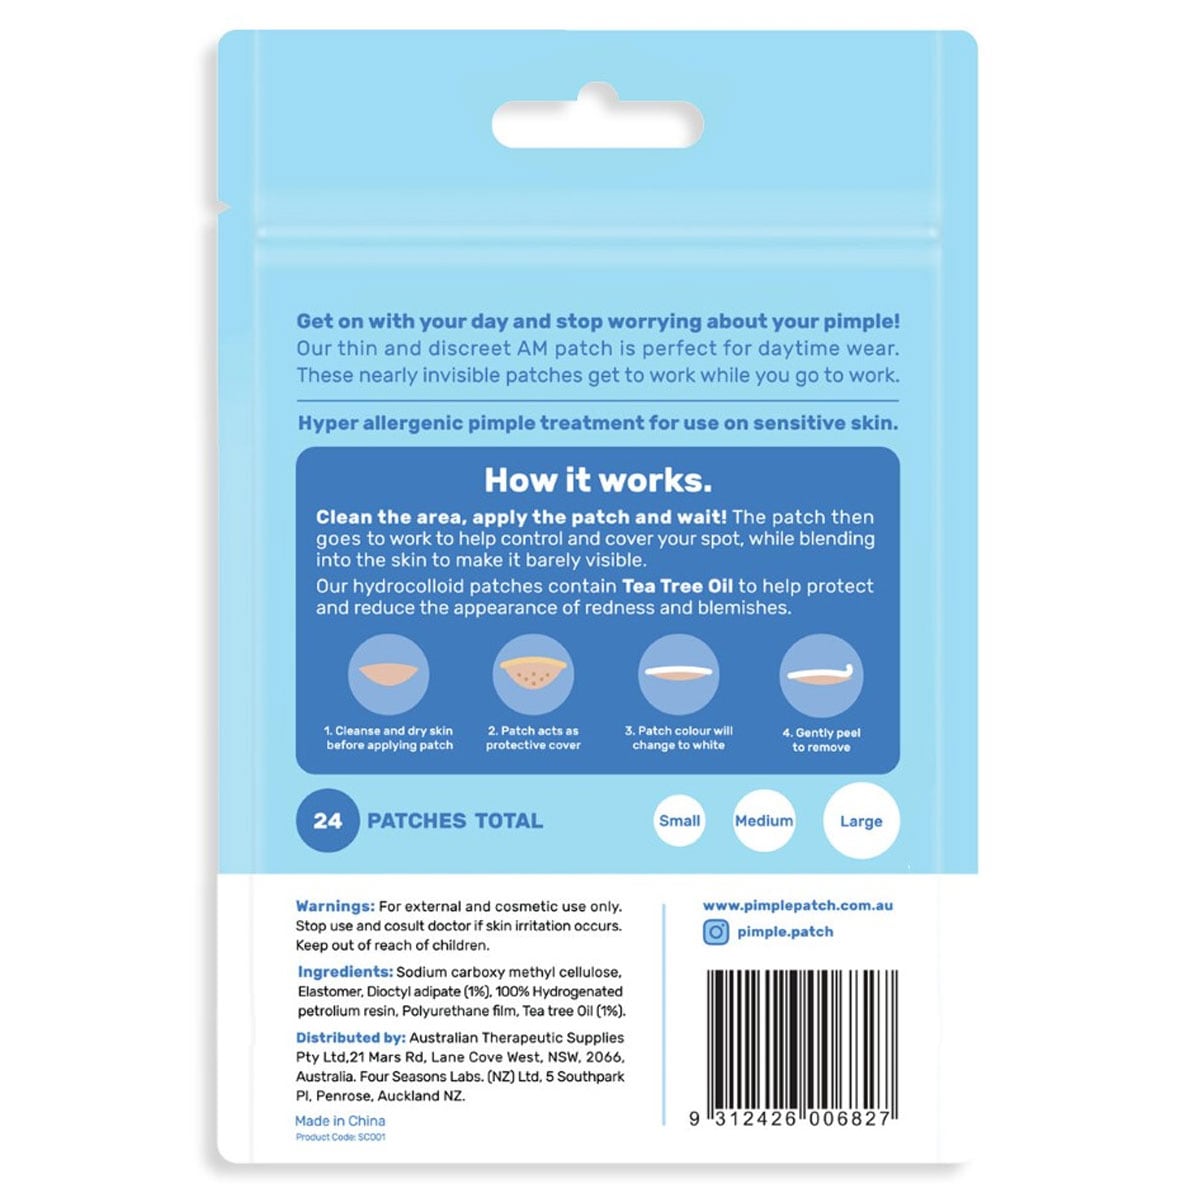 Skin Control Pimple Patch AM Daytime 24 Pack